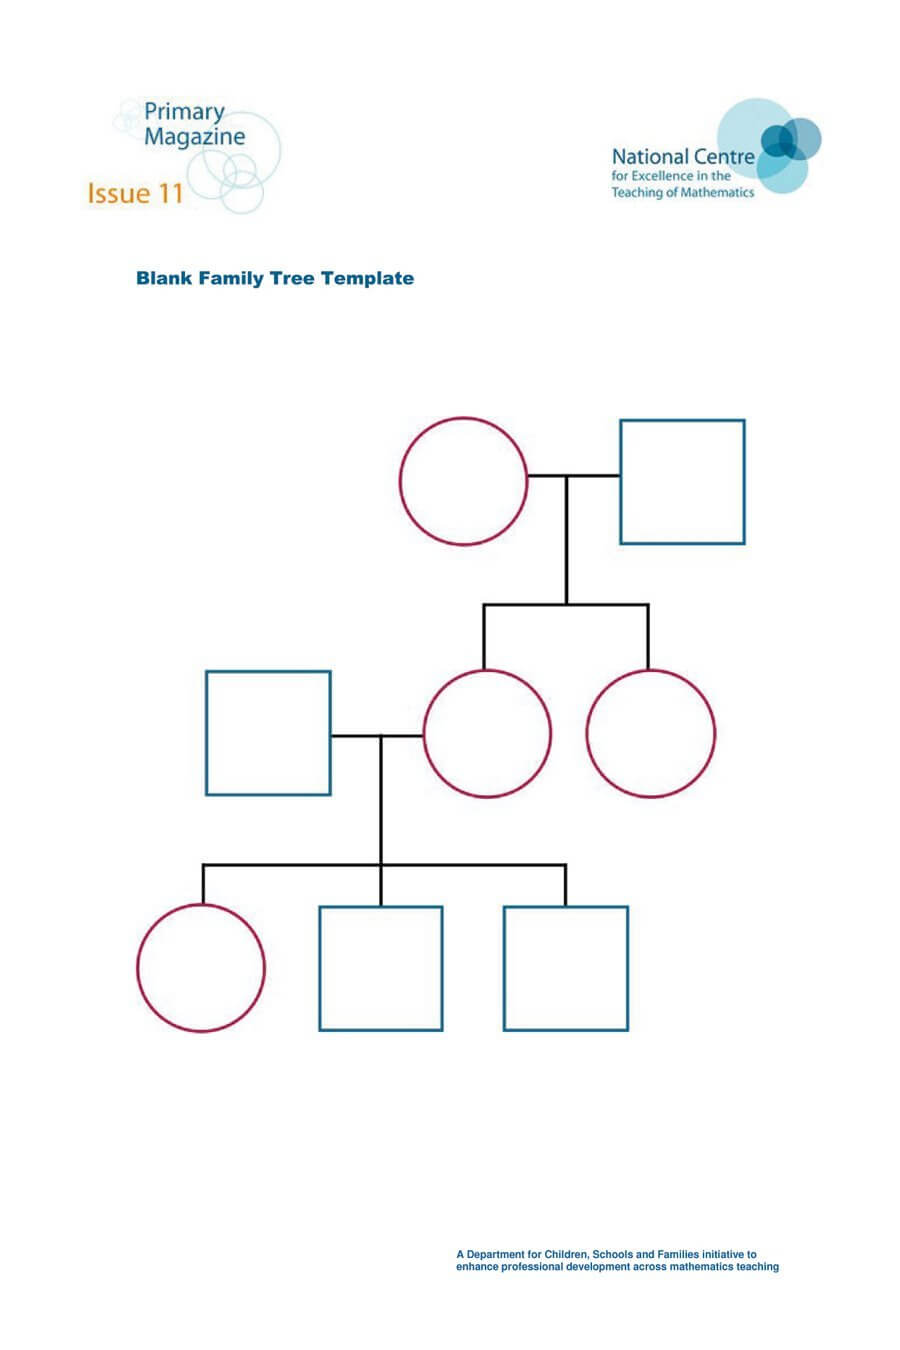 50+ Free Family Tree Templates (Word, Excel, Pdf) ᐅ Intended For Blank Family Tree Template 3 Generations